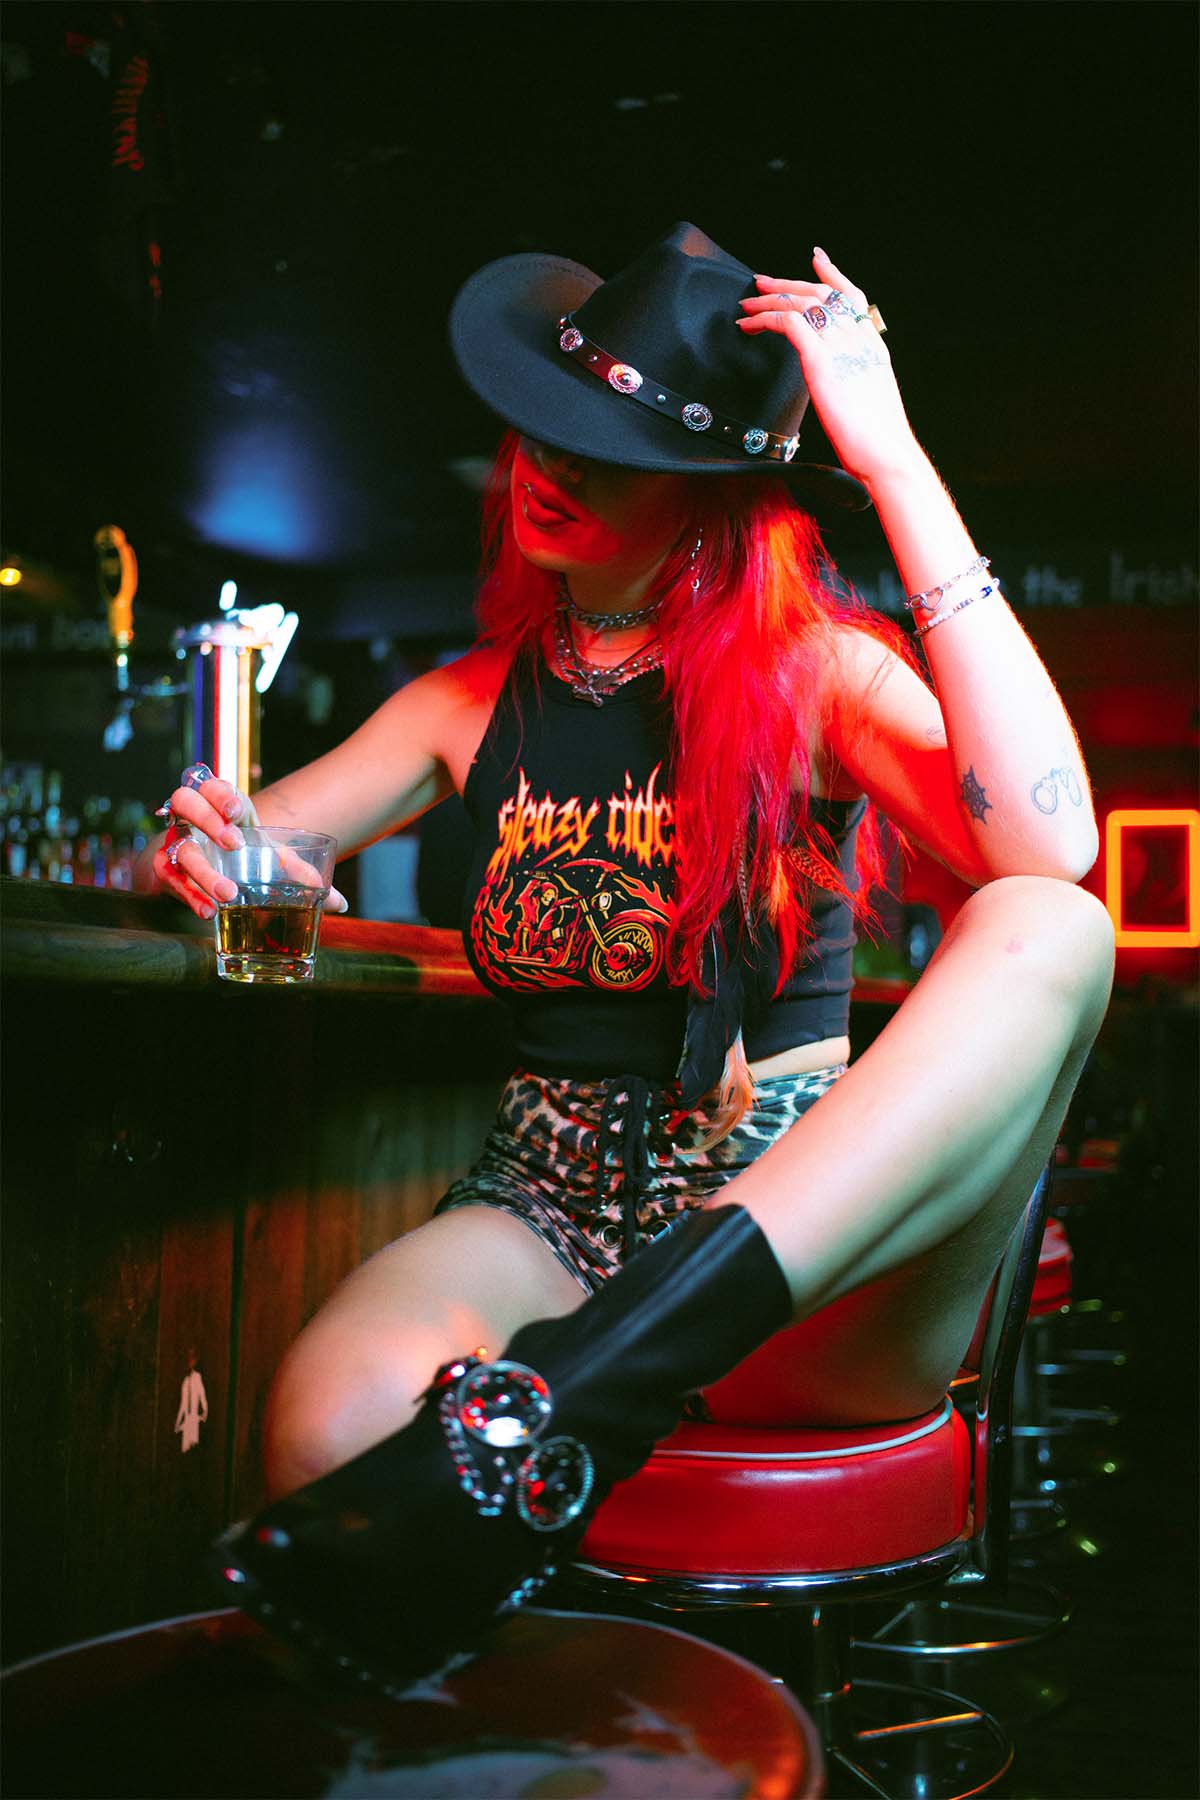 Amy Valentine wearing a Sleazy Rider tank top and western gothic cowboy hat in Slim Jim's London